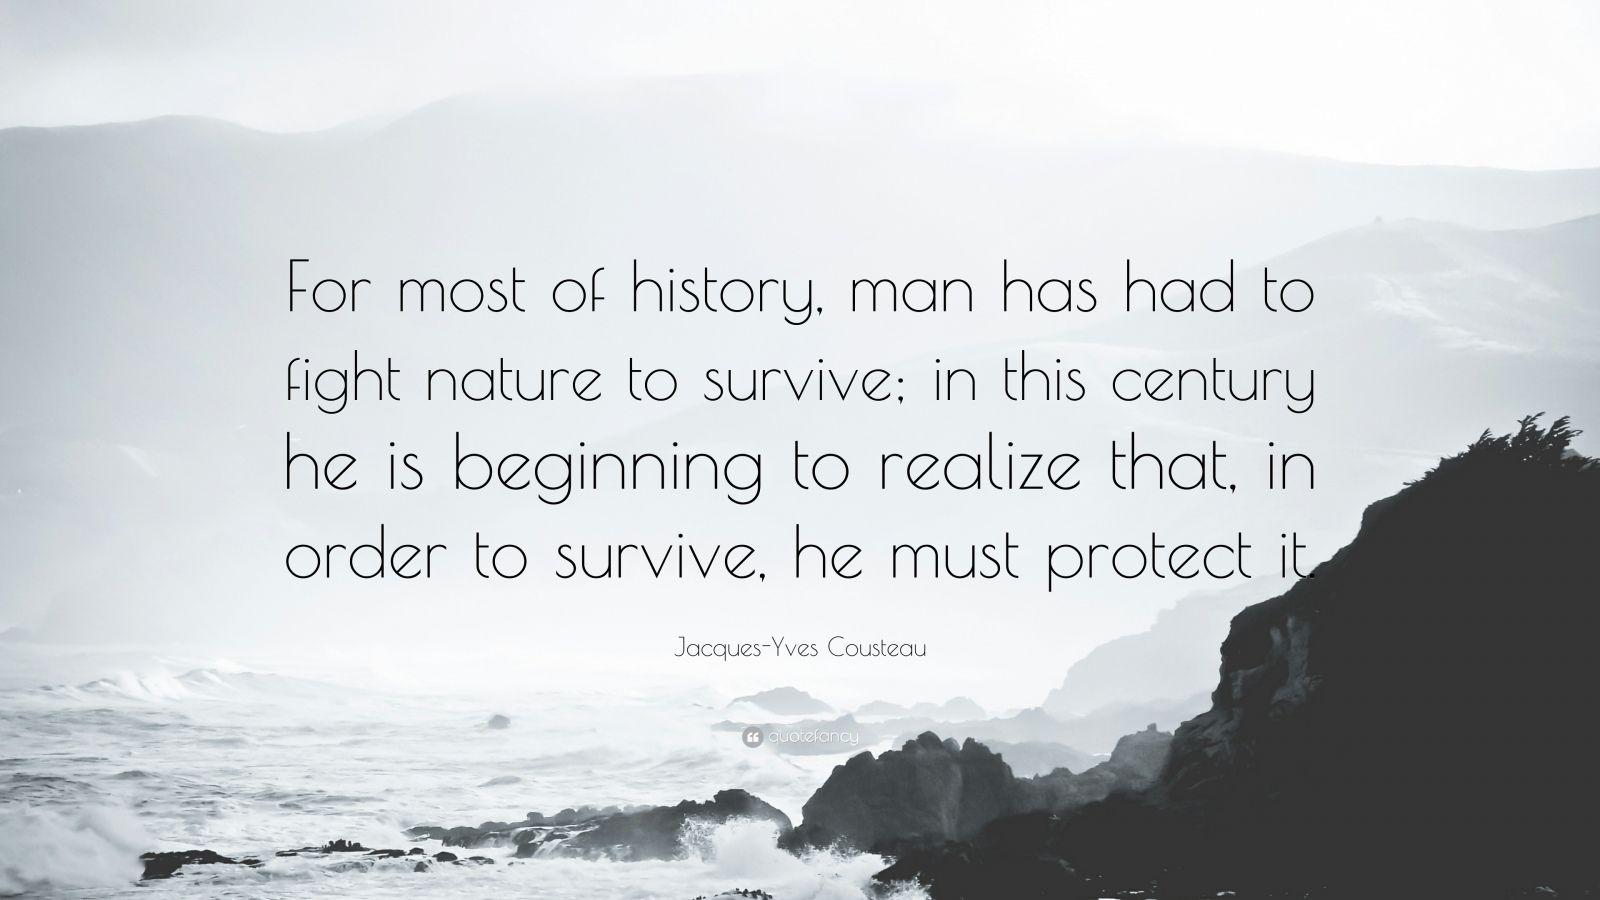 Jacques Yves Cousteau Quotes (62 Wallpaper)